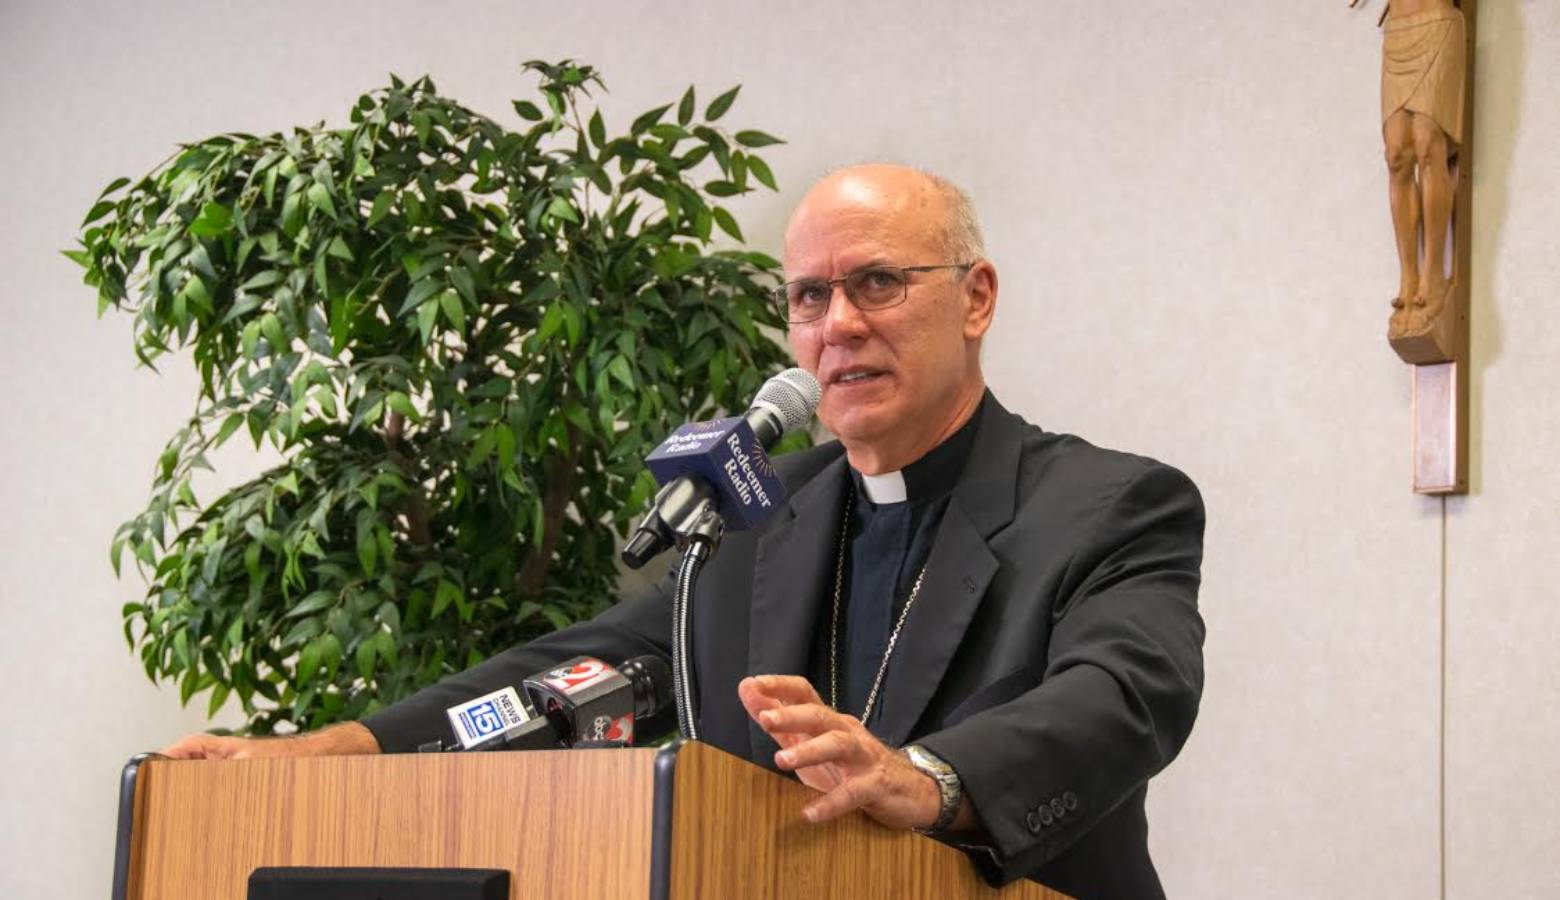 Bishop Kevin Rhoades at a recent press conference in Fort Wayne regarding the Pennsylvania grand jury report on child sex abuse in the Catholic Church.